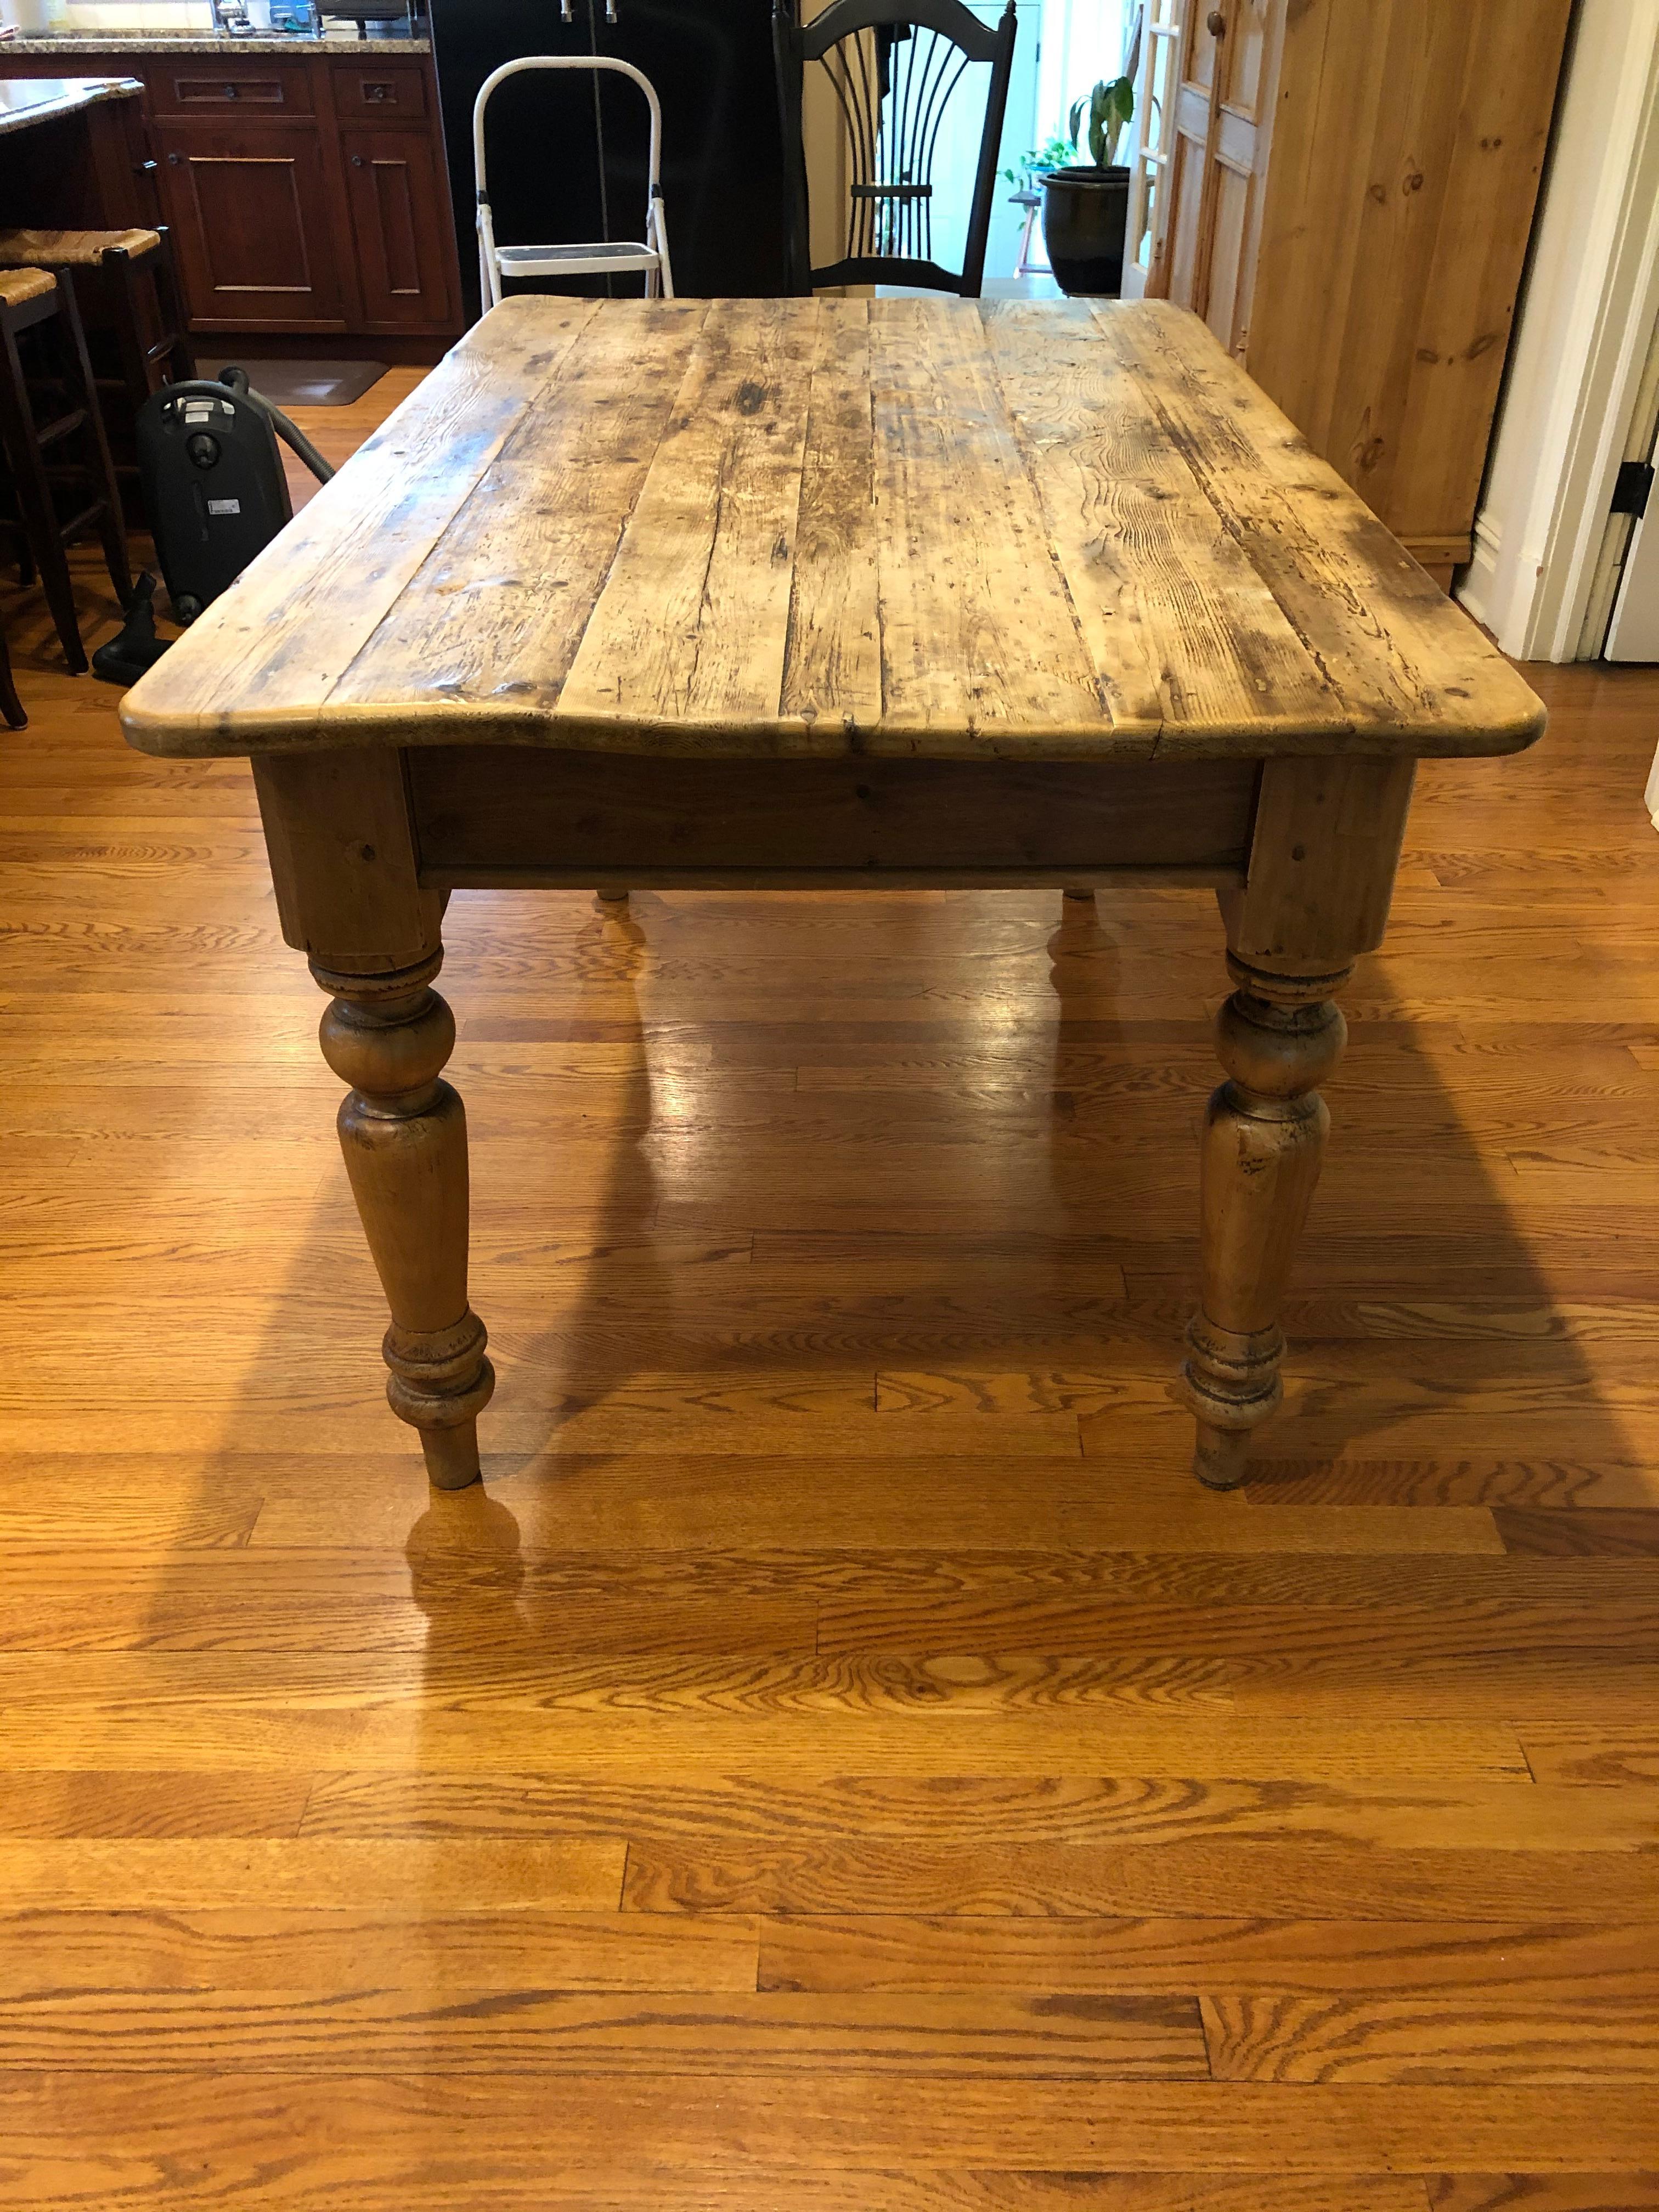 Warm and welcoming antique American pine farm table having earthy rustic patina and handsome substantial turned legs. Great for a kitchen.
apron height 24.5.